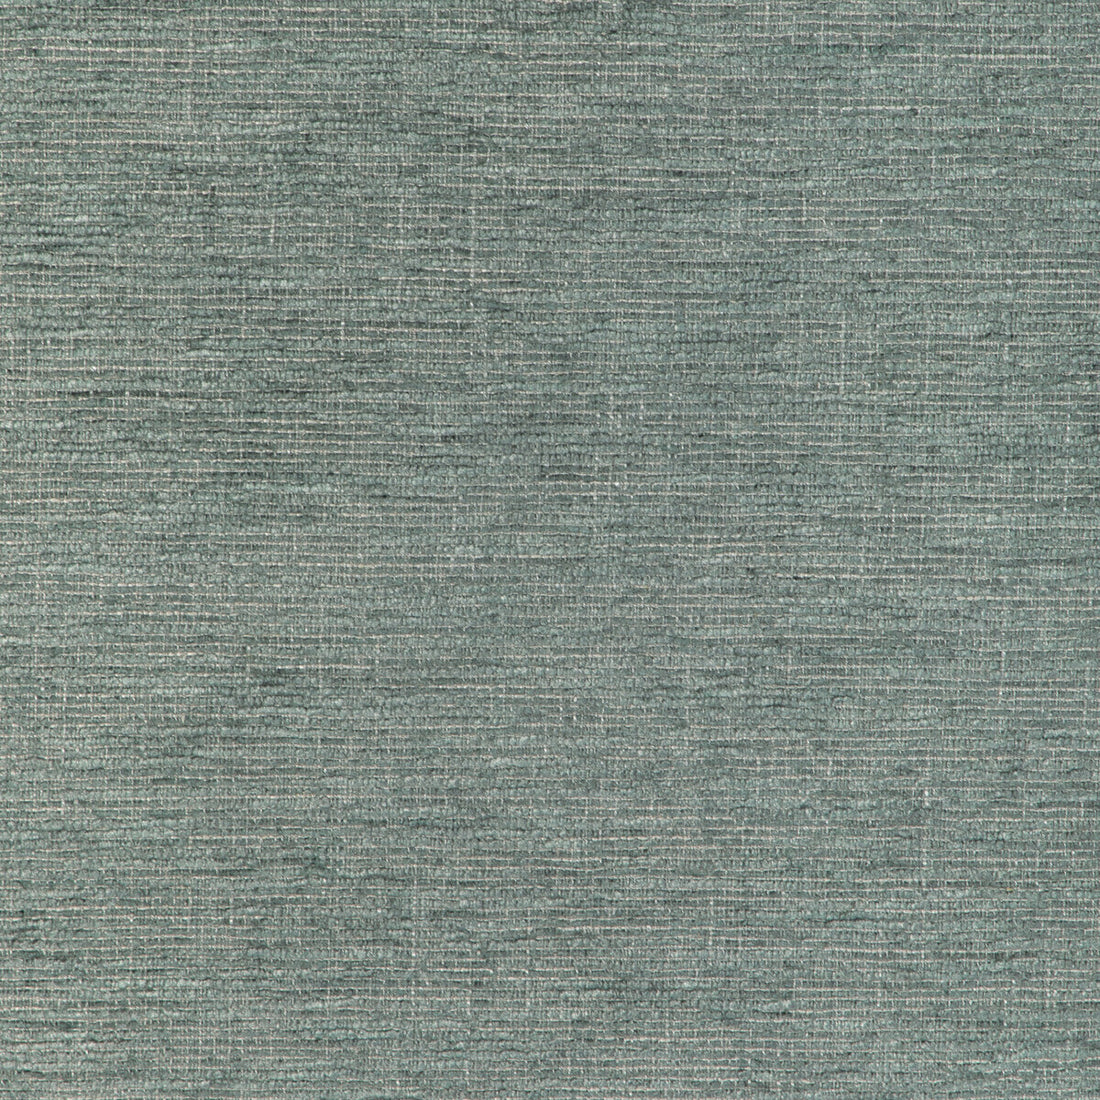 Chenille Aura fabric in jade color - pattern 36871.35.0 - by Kravet Couture in the Atelier Weaves collection